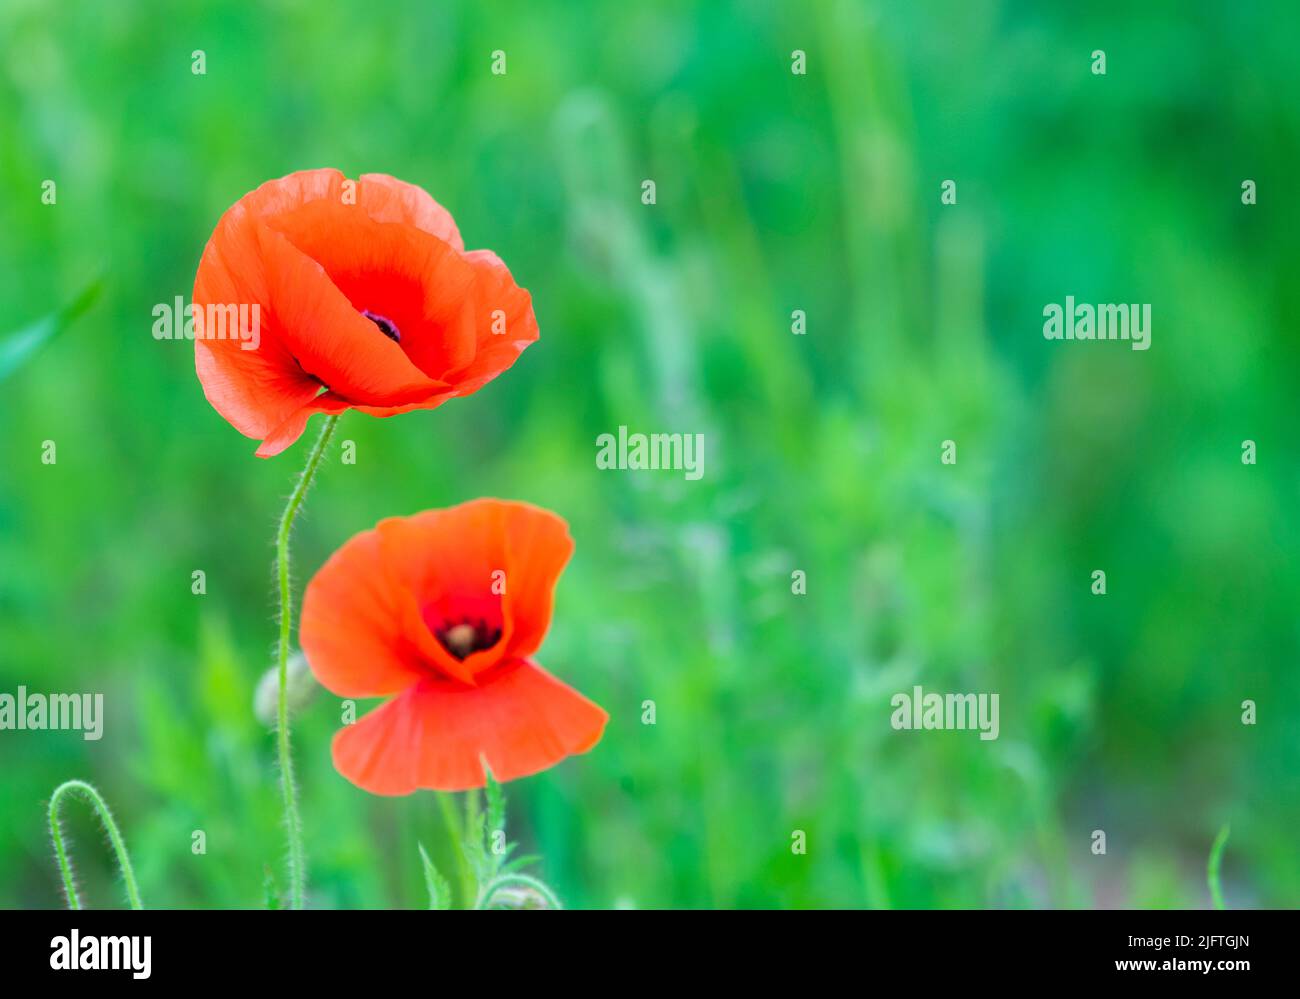 Flowers poppies blossom on wild field. Remembrance day concept. Horizontal remembrance day theme poster, greeting cards, headers, website and app Stock Photo